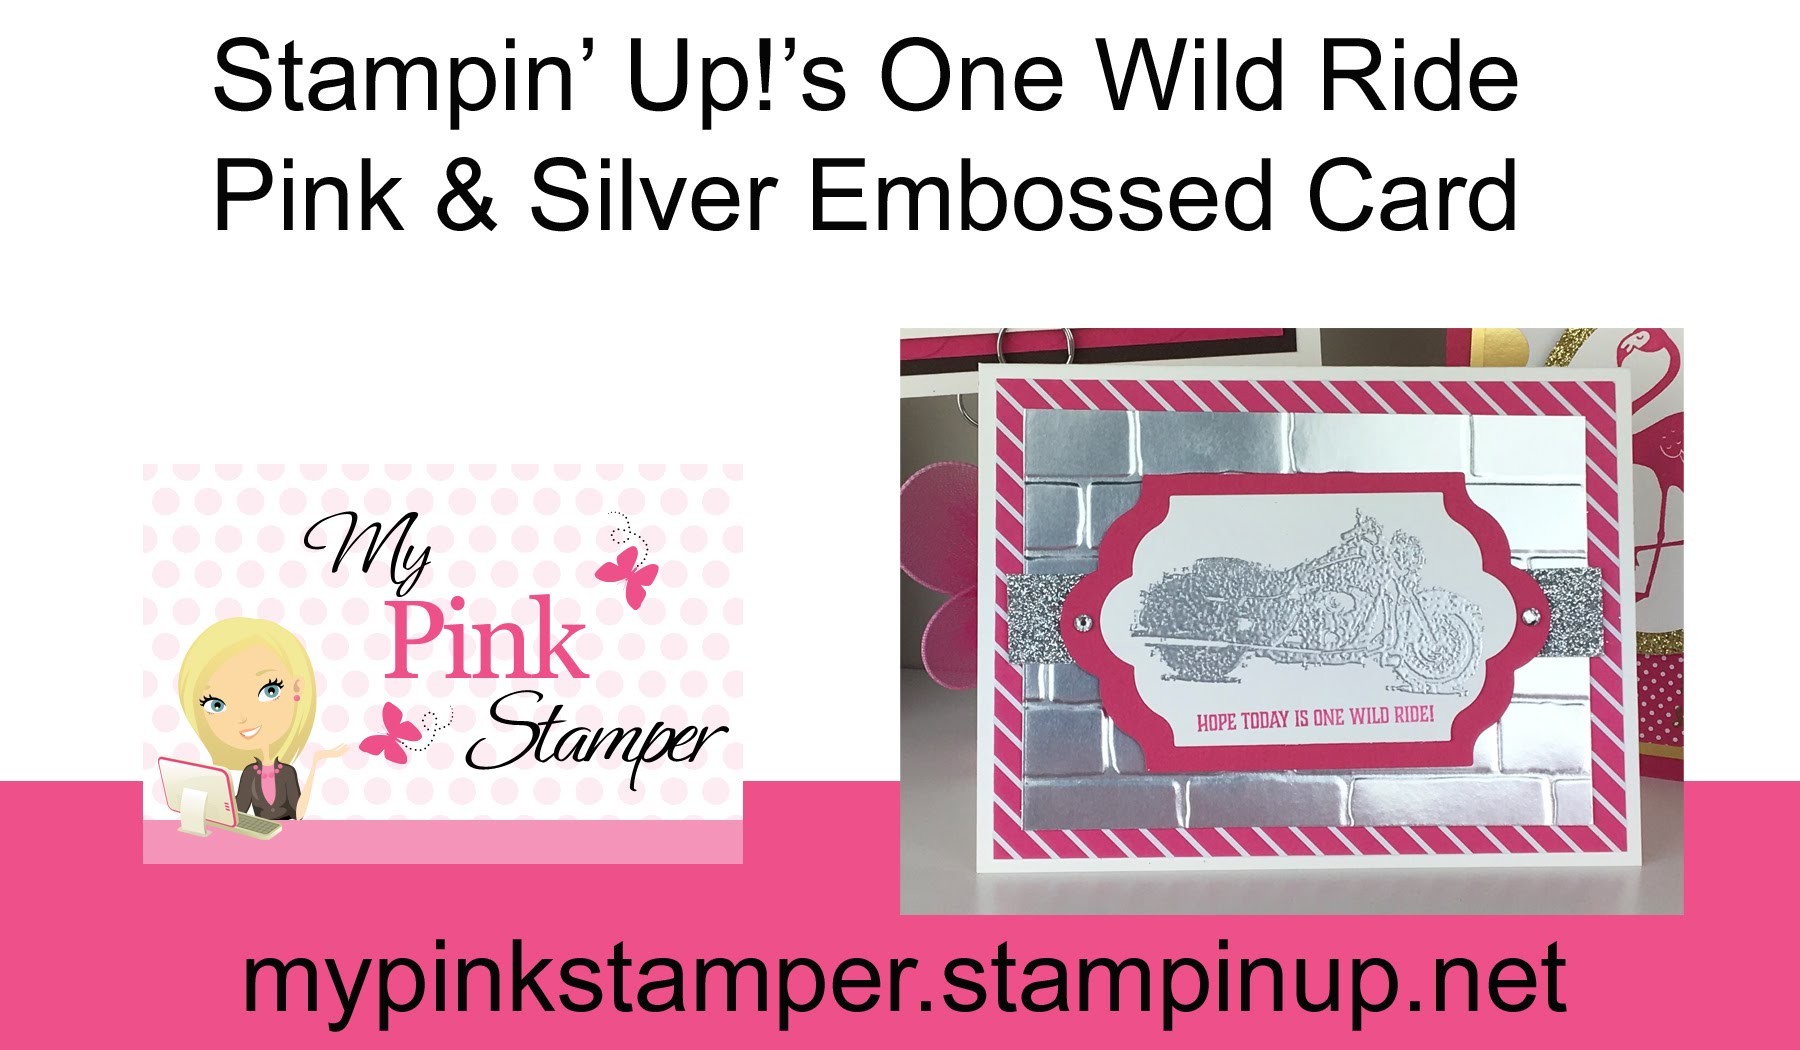 How to Emboss with Stampin' Up! One Wild Ride Stamp Set - Episode 499